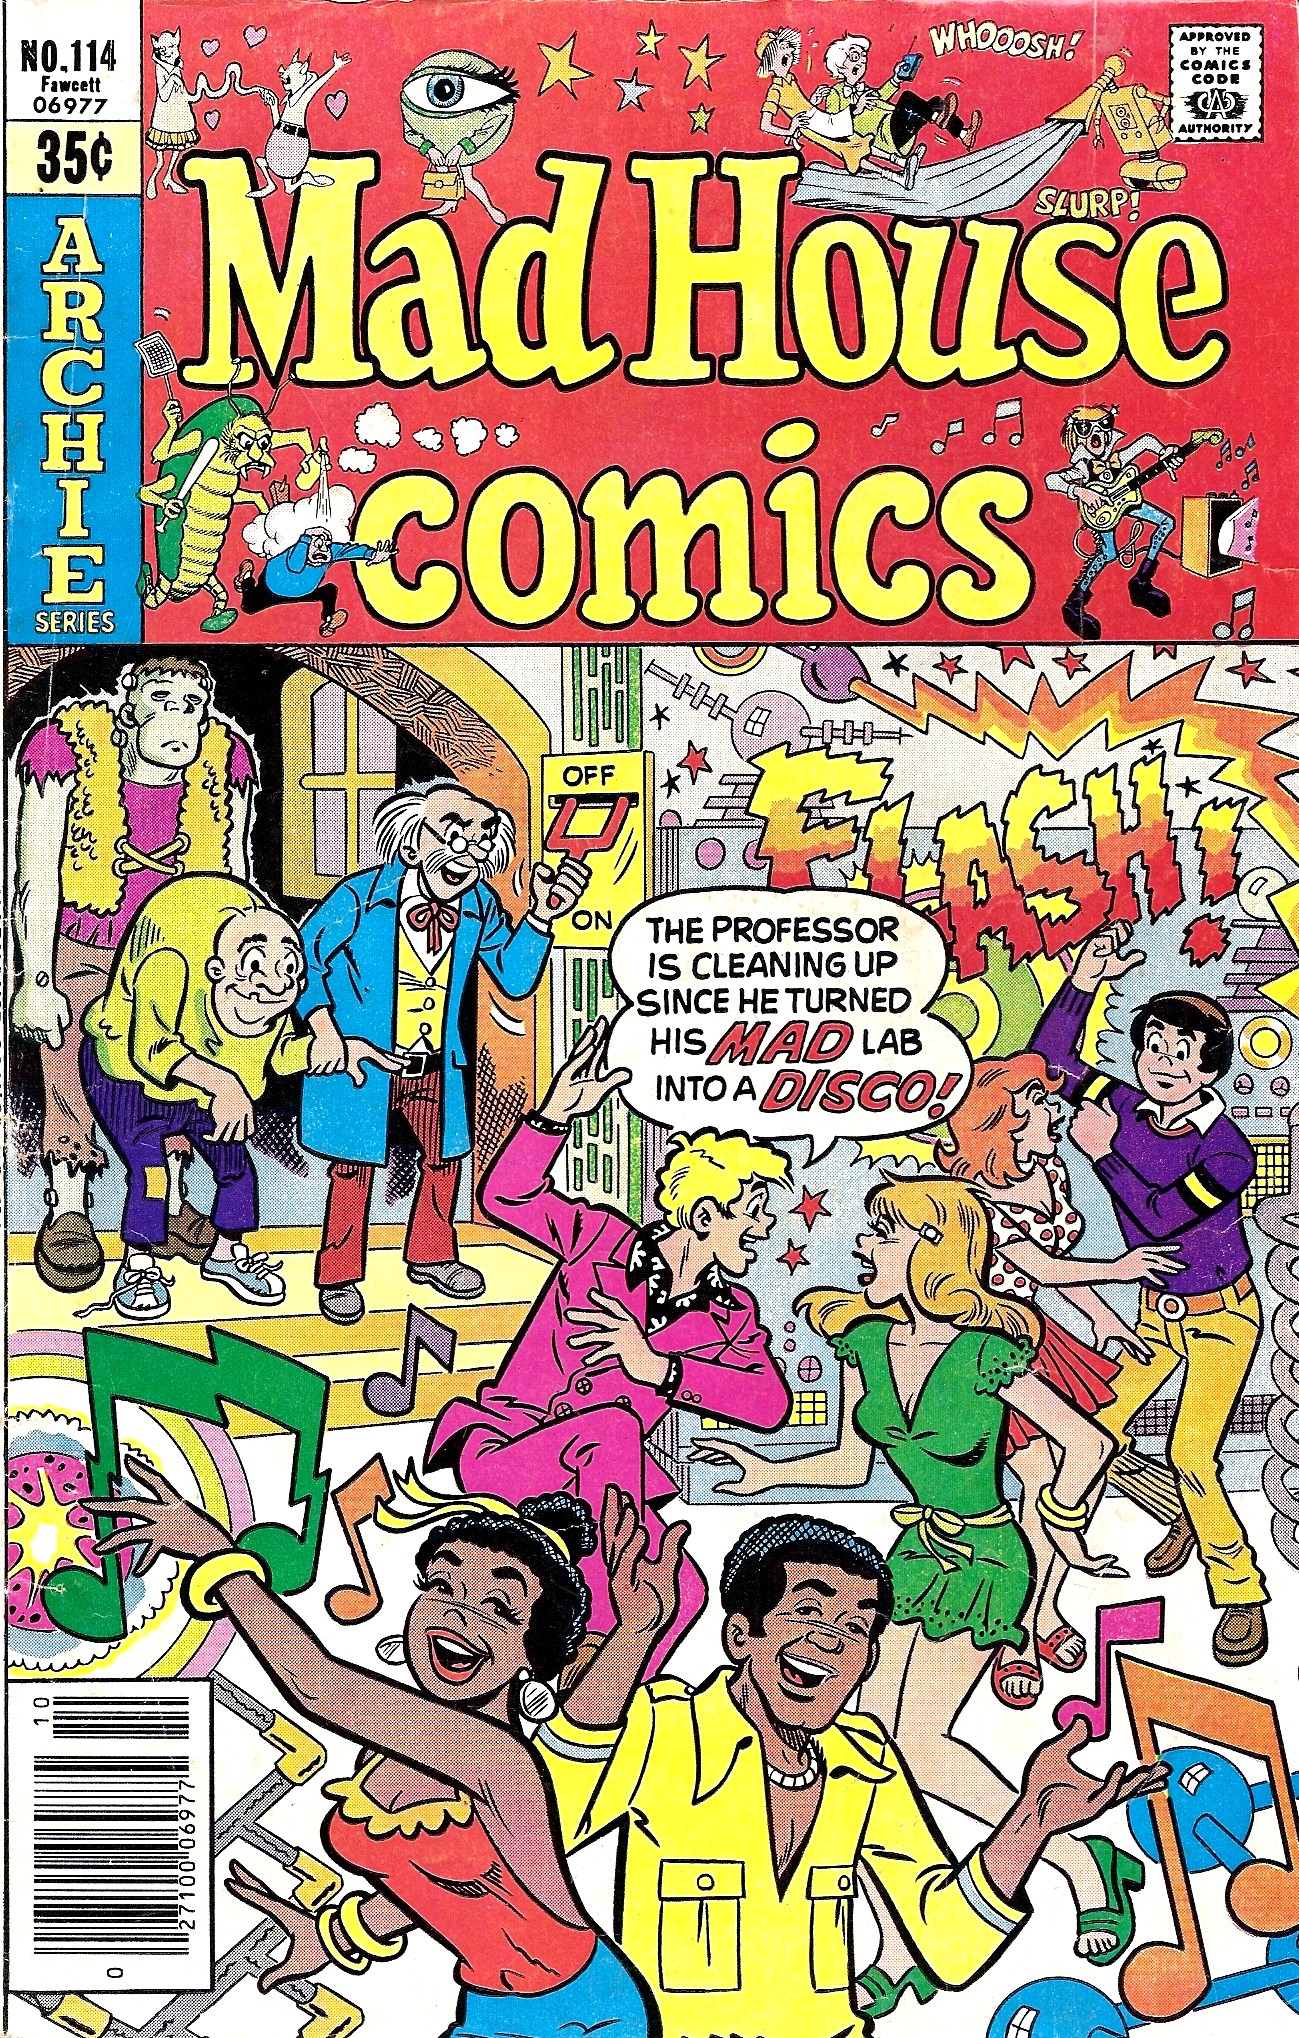 Read online Madhouse Comics comic -  Issue #114 - 1